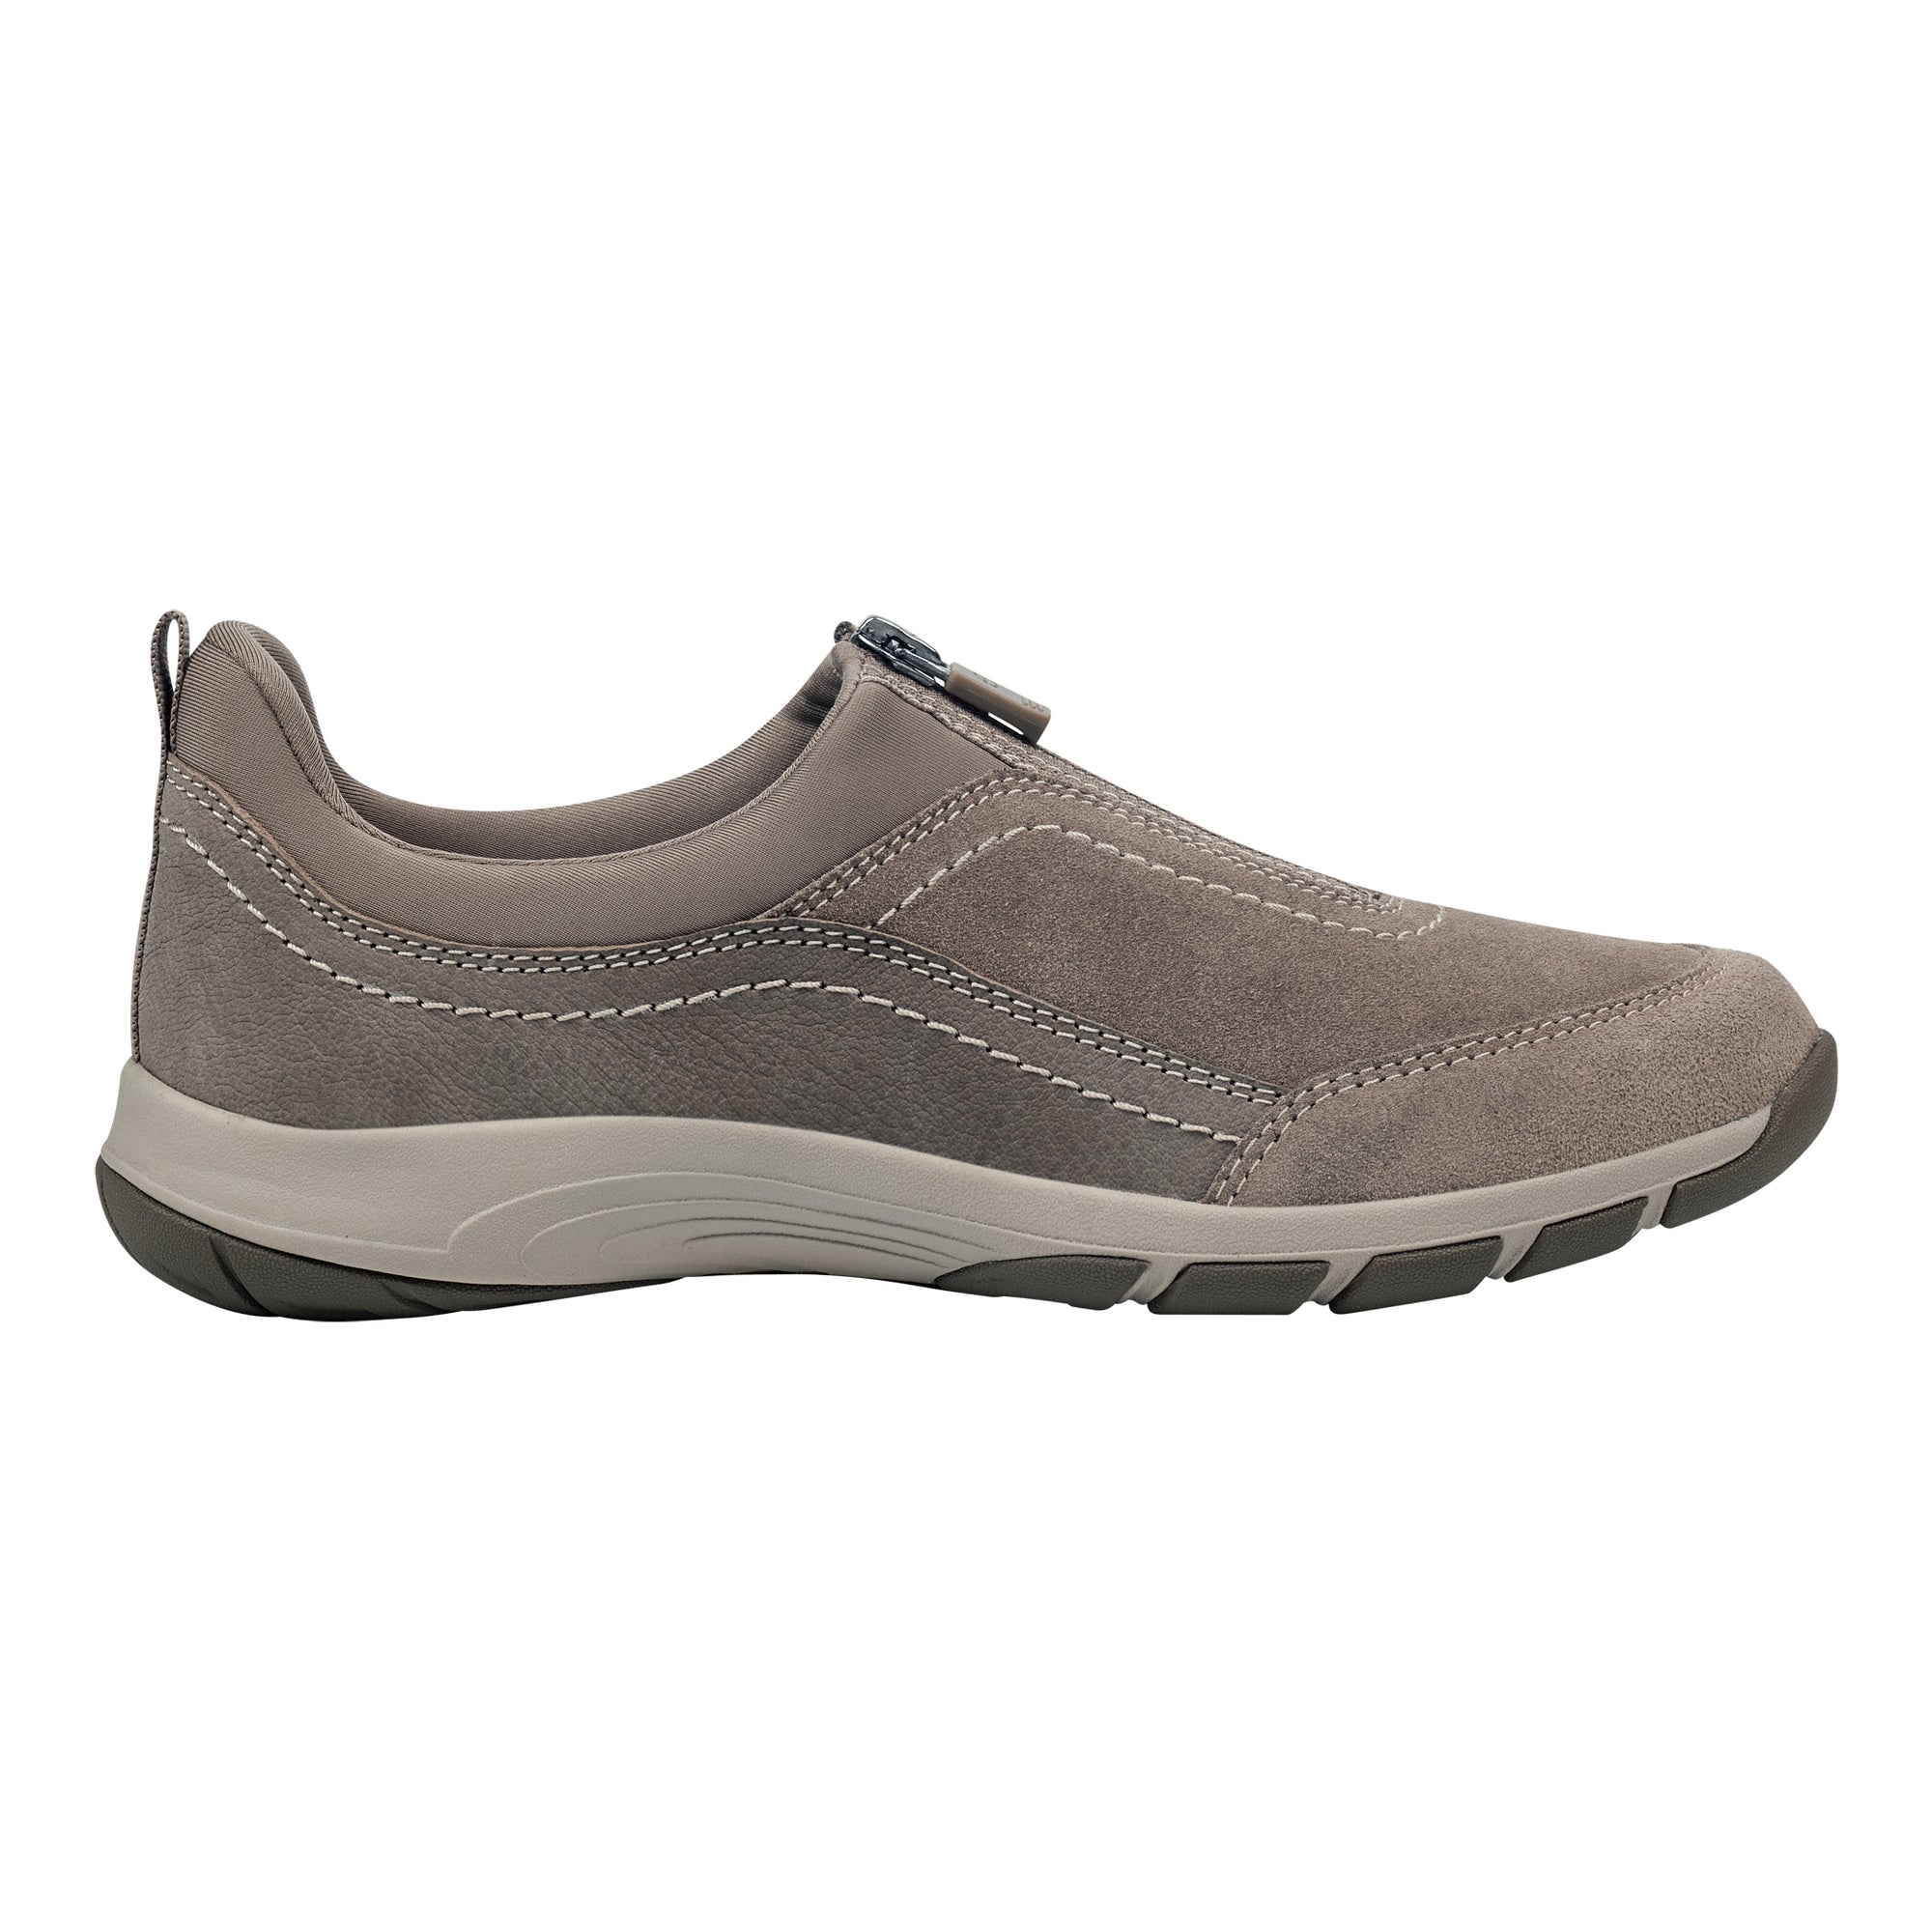 Cave Walking Shoes - Easy Spirit